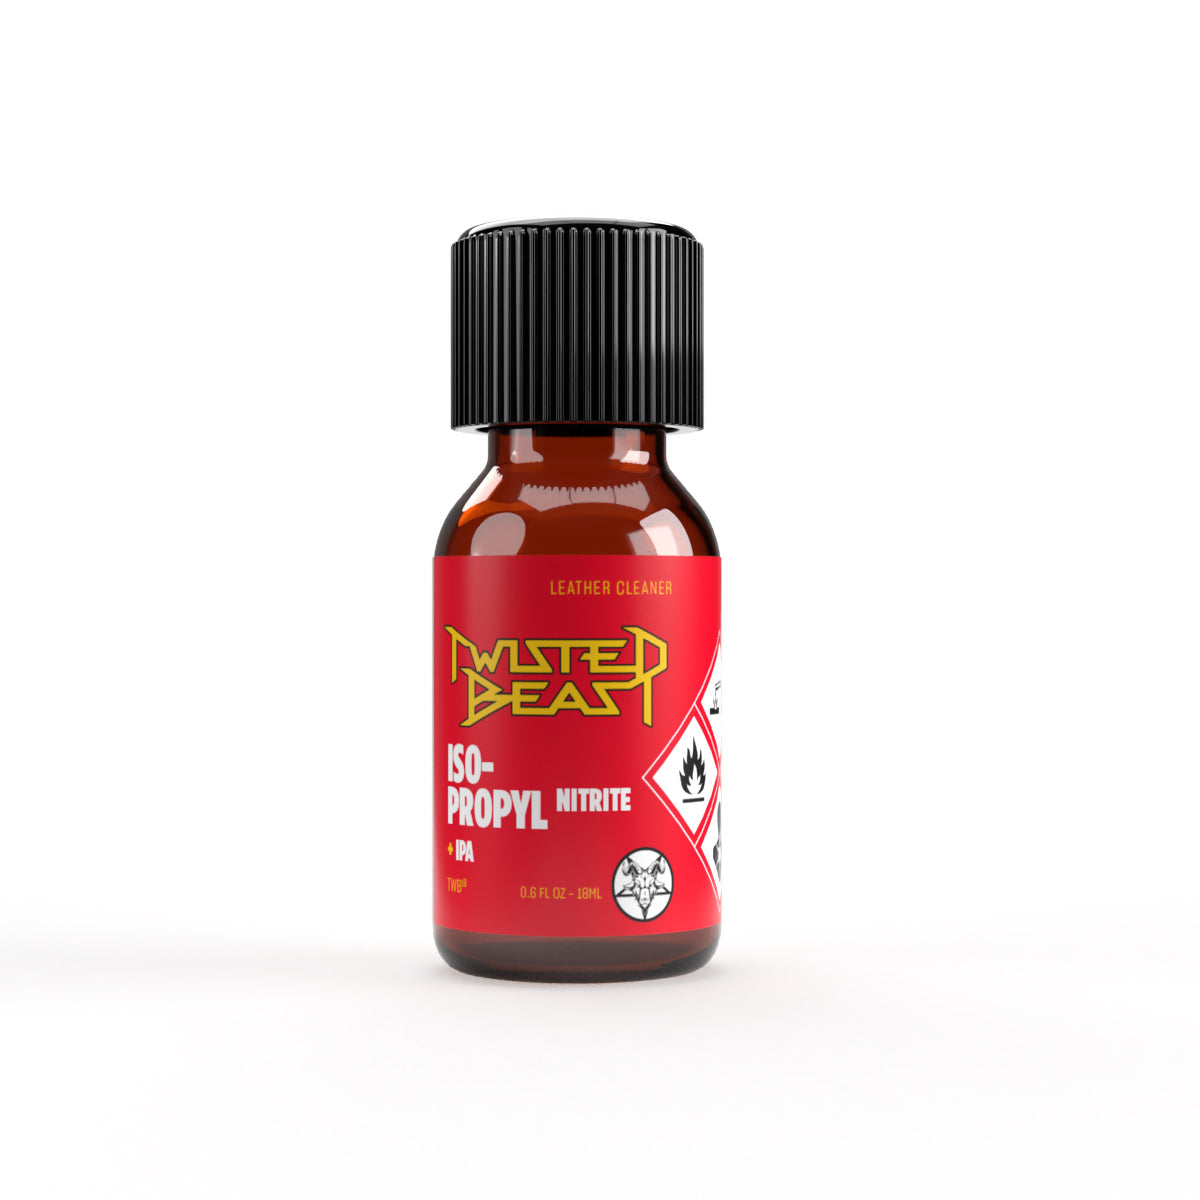 A product photo of a bottle of Twisted Beast Propyl Poppers.